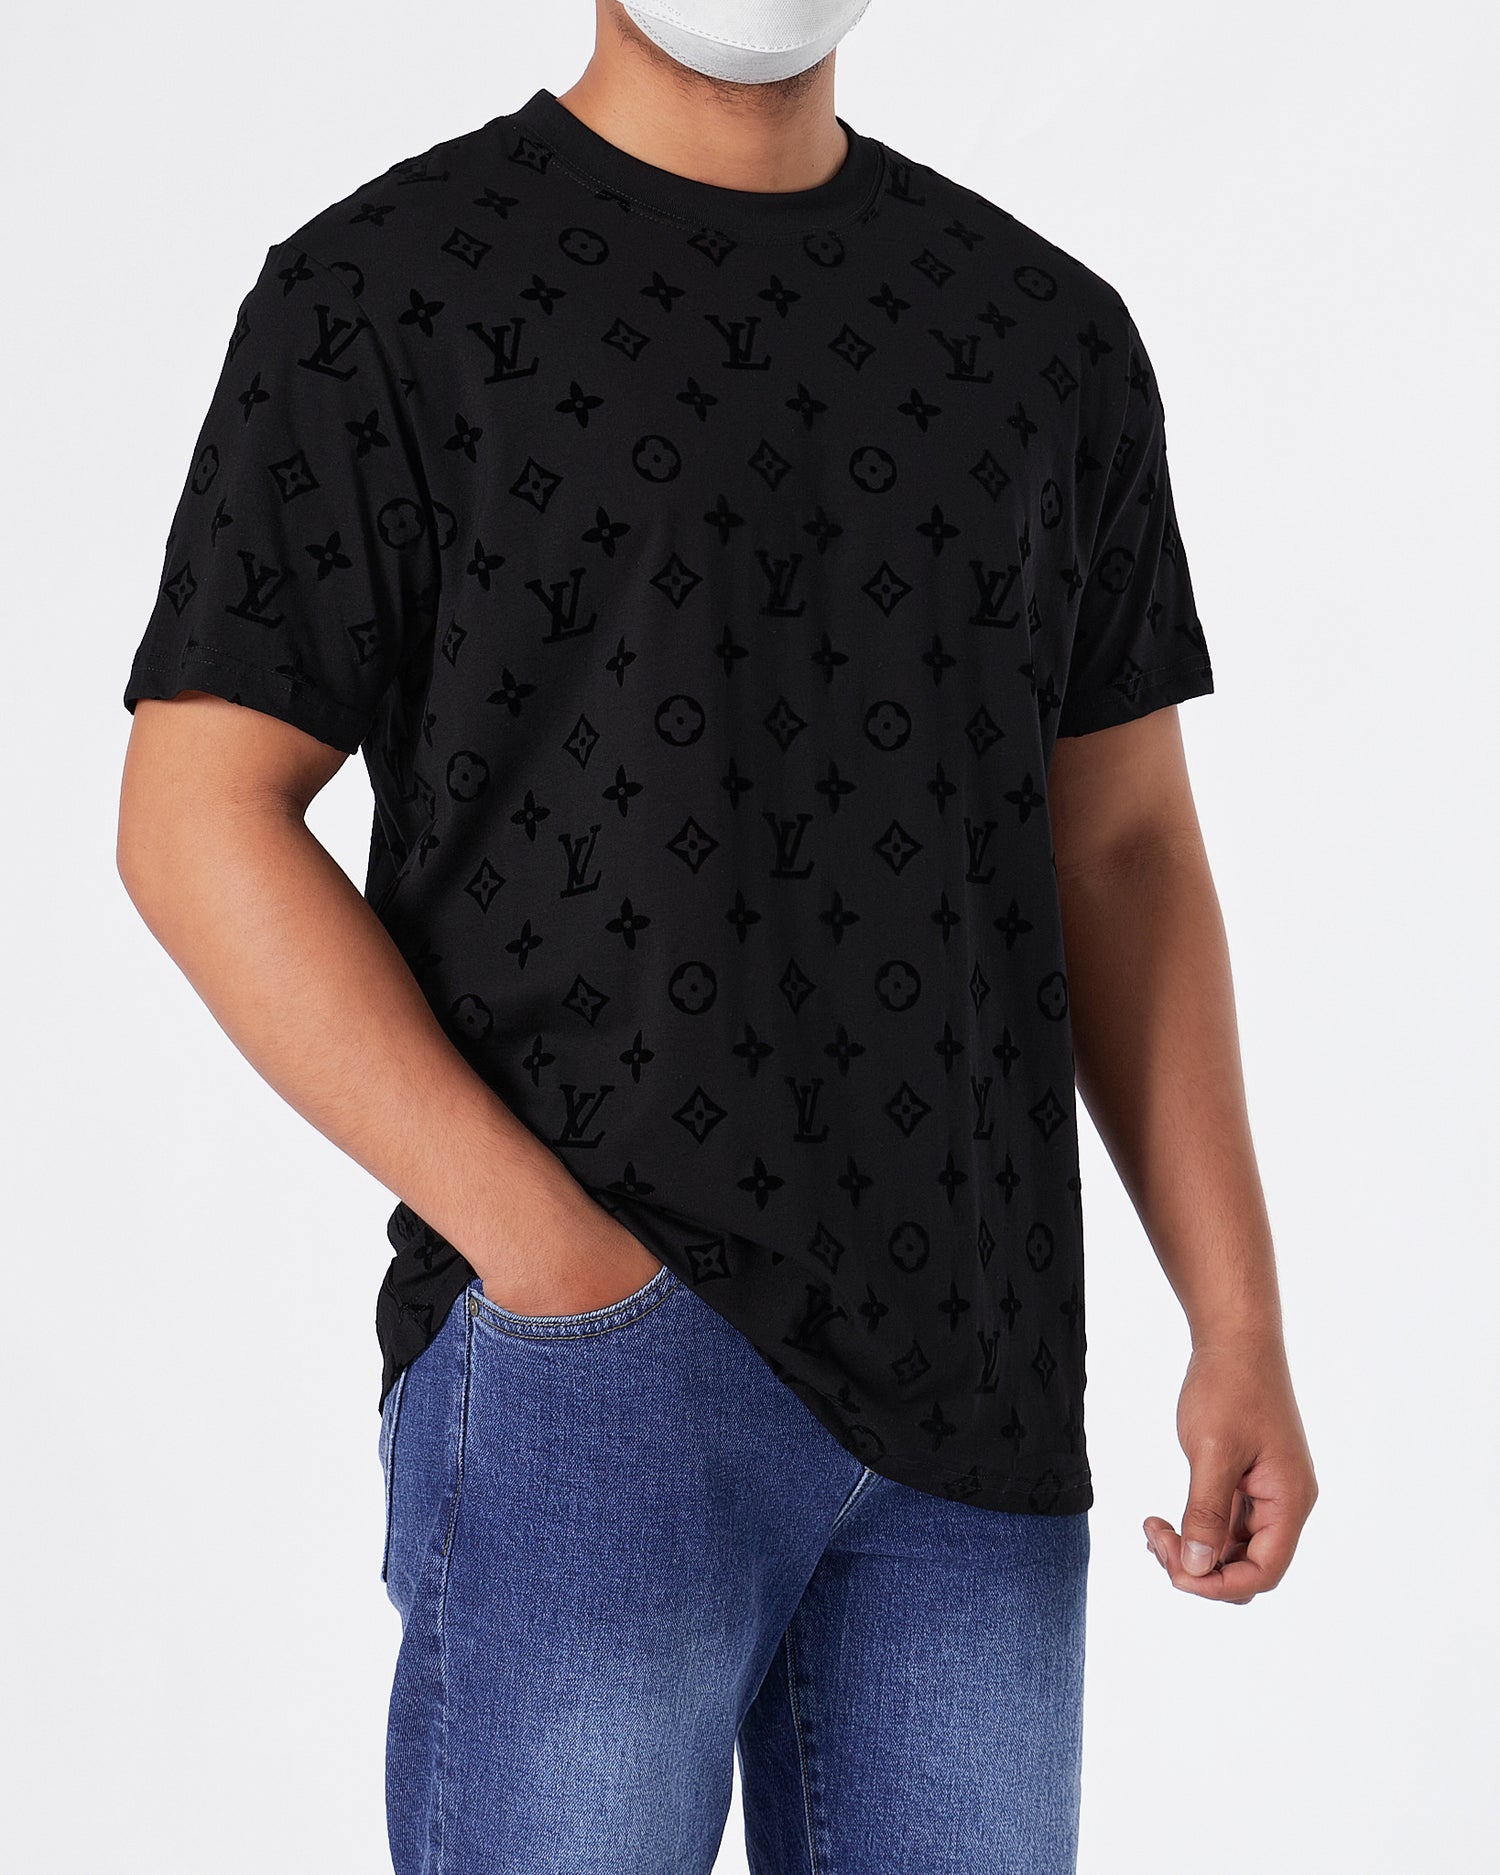 LV Graphic Men T-Shirt 15.90 - MOI OUTFIT